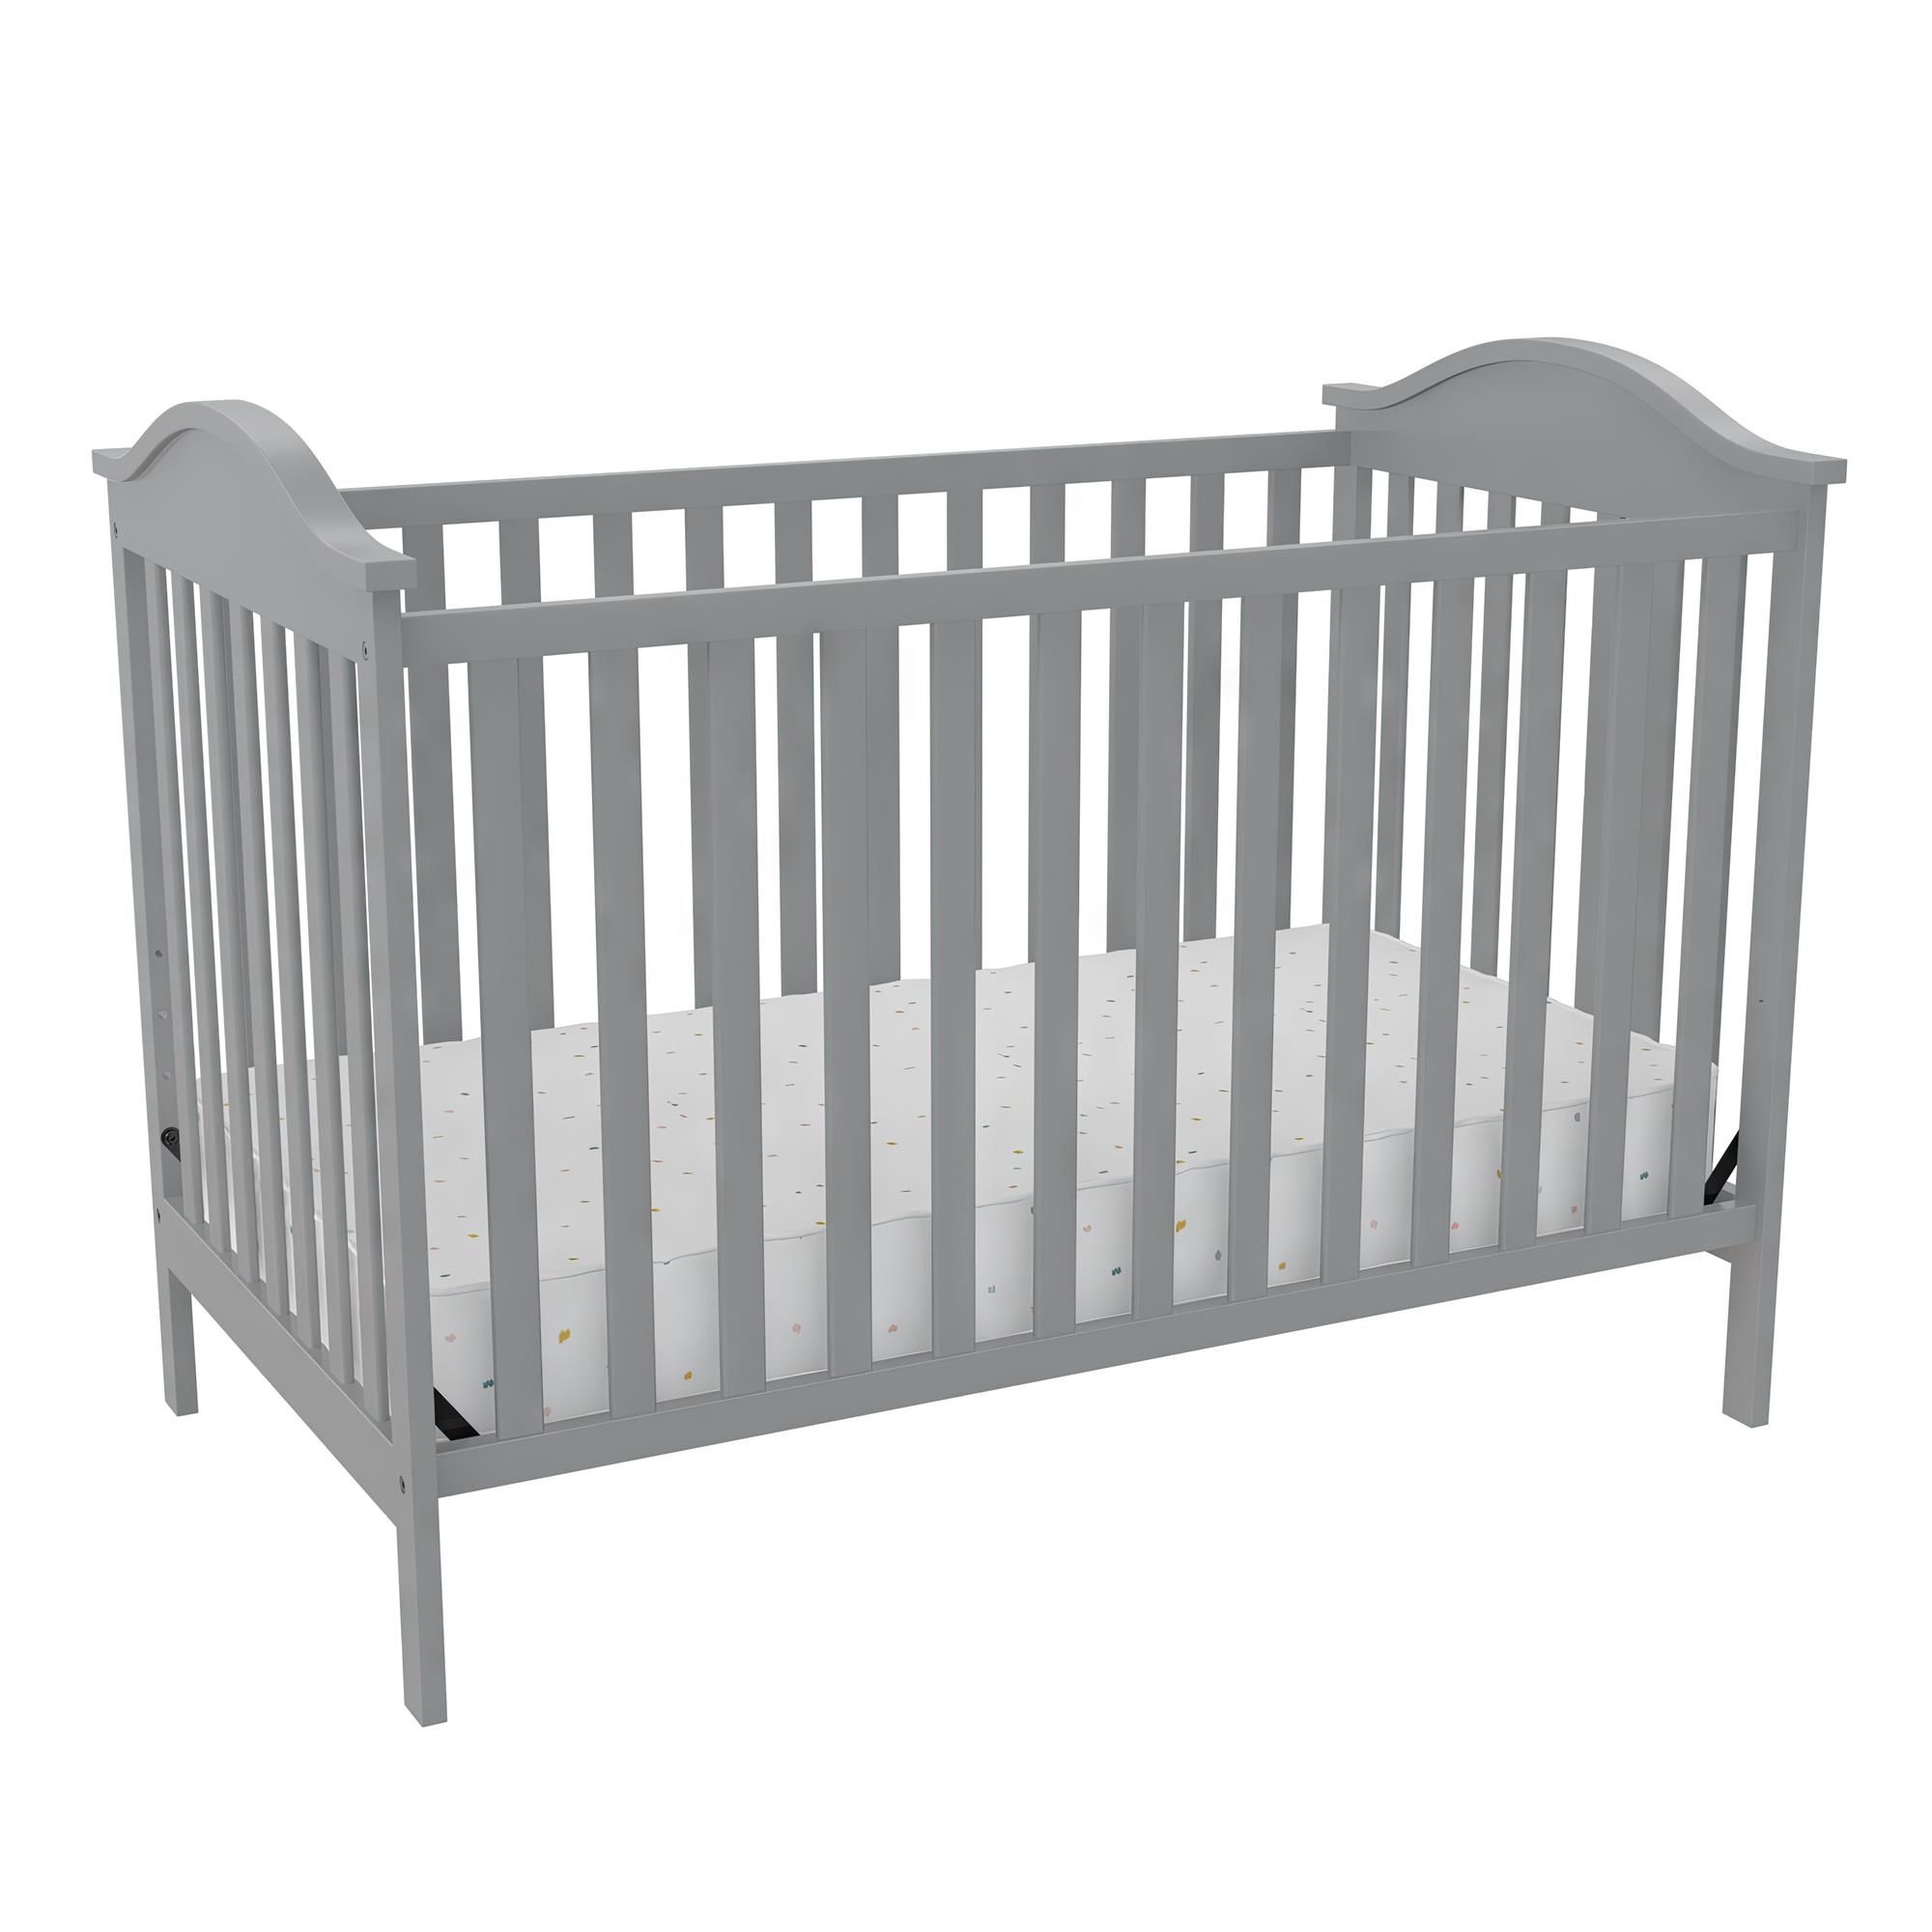 Baby Relax Adele 3-in-1 Convertible Crib, Gray - image 1 of 11